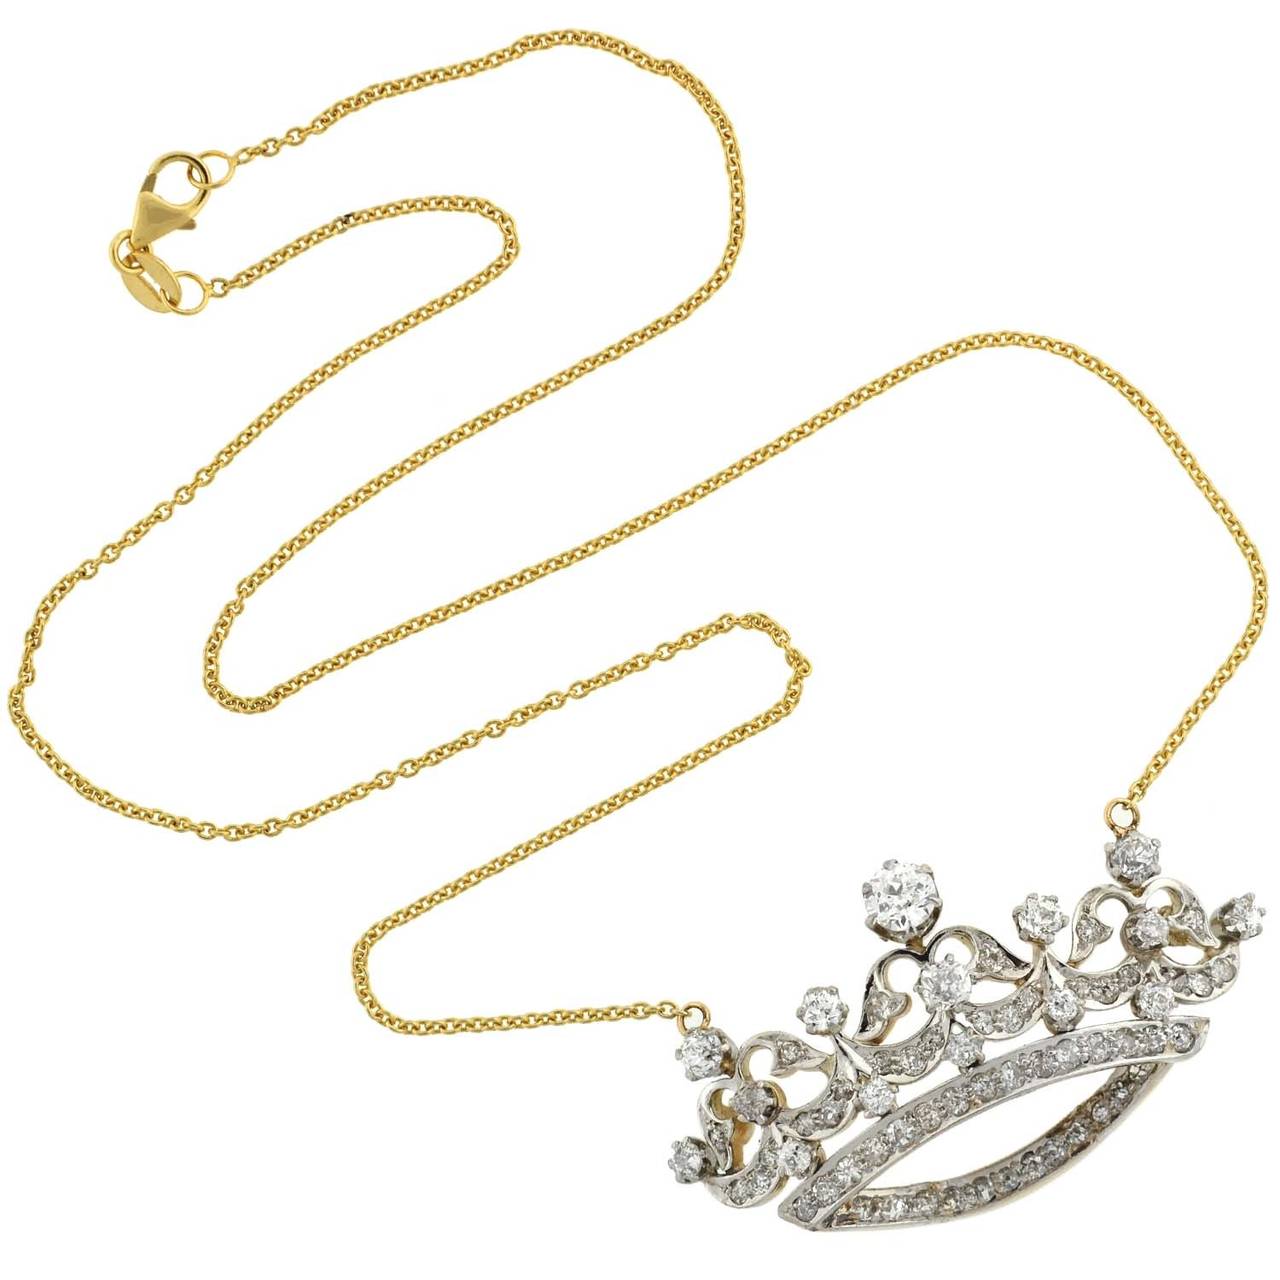 A spectacular diamond crown necklace from the Edwardian (ca1910) era! This exquisite piece is comprised of a crown pendant made of platinum-topped 14kt gold, which hangs from a vibrant gold chain. The crown has flowing, feminine design, and features